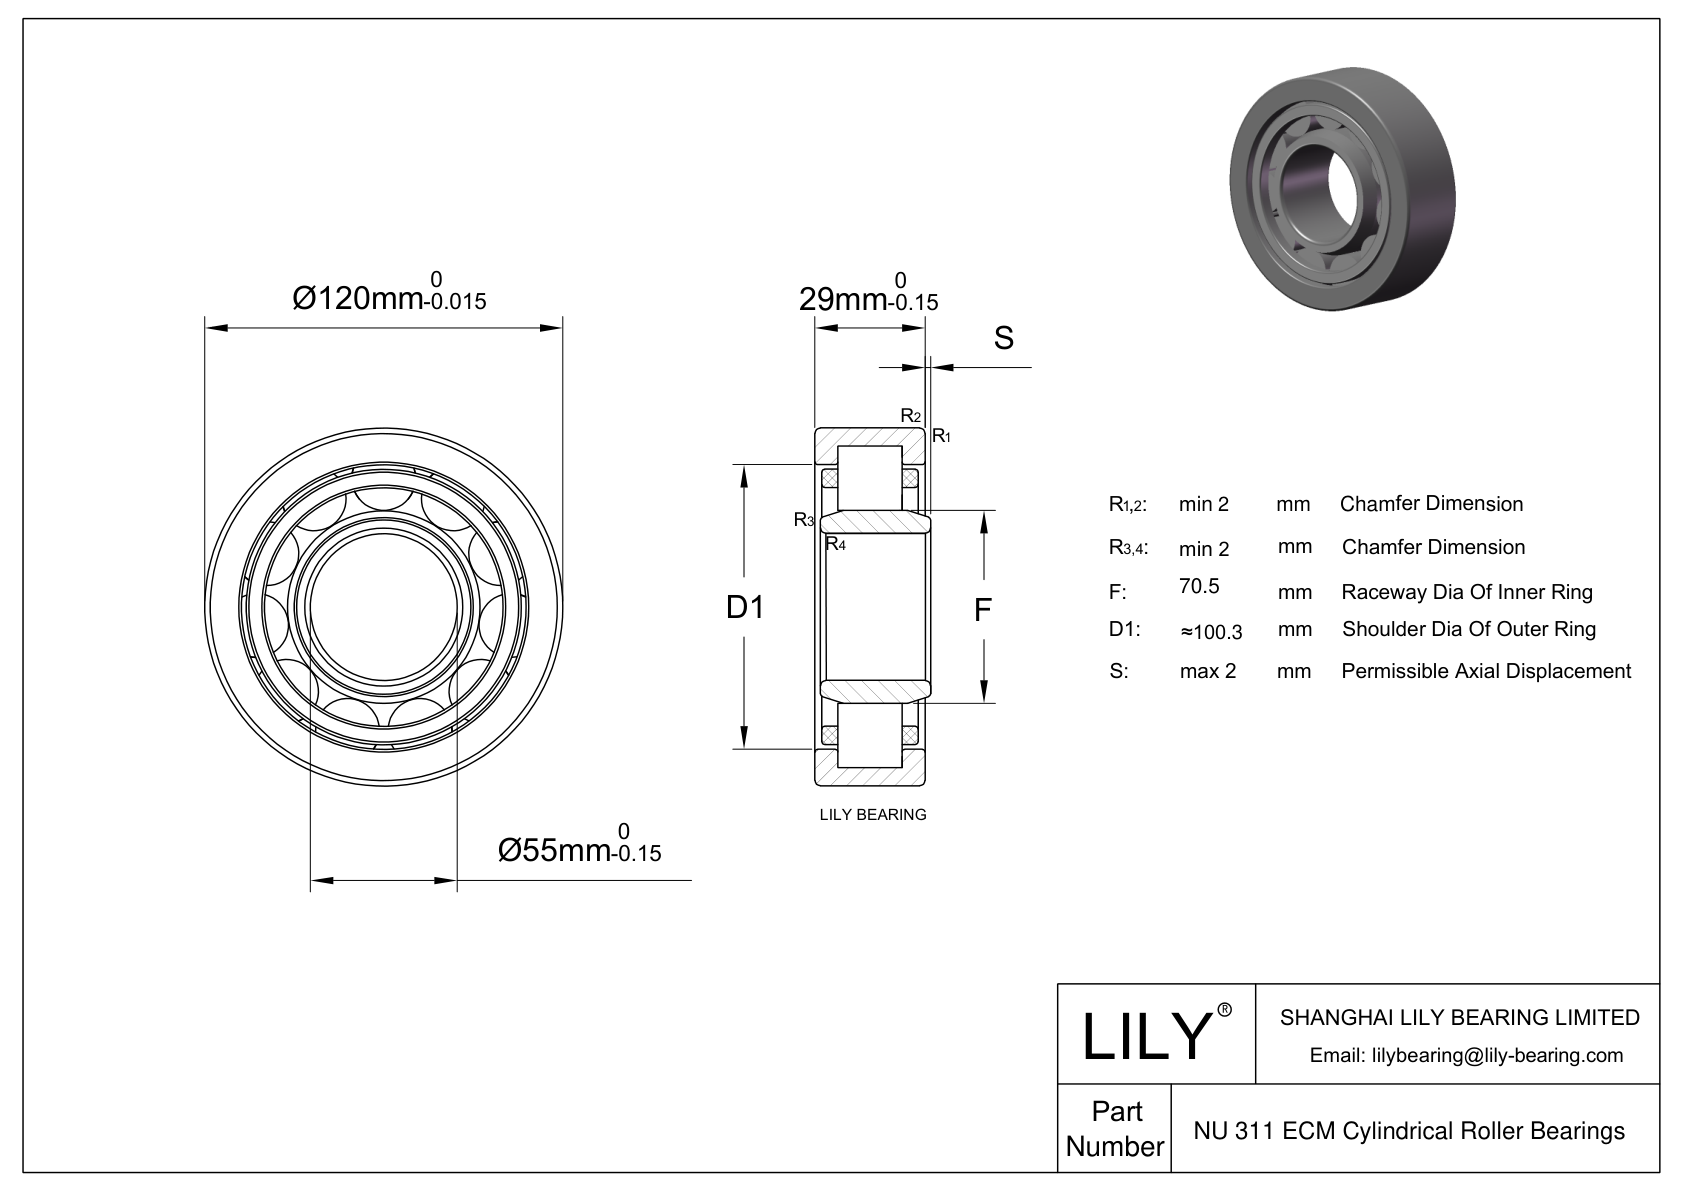 NU 311 ECM/C3VL0241 Ceramic Coated Cylindrical Roller Bearings cad drawing